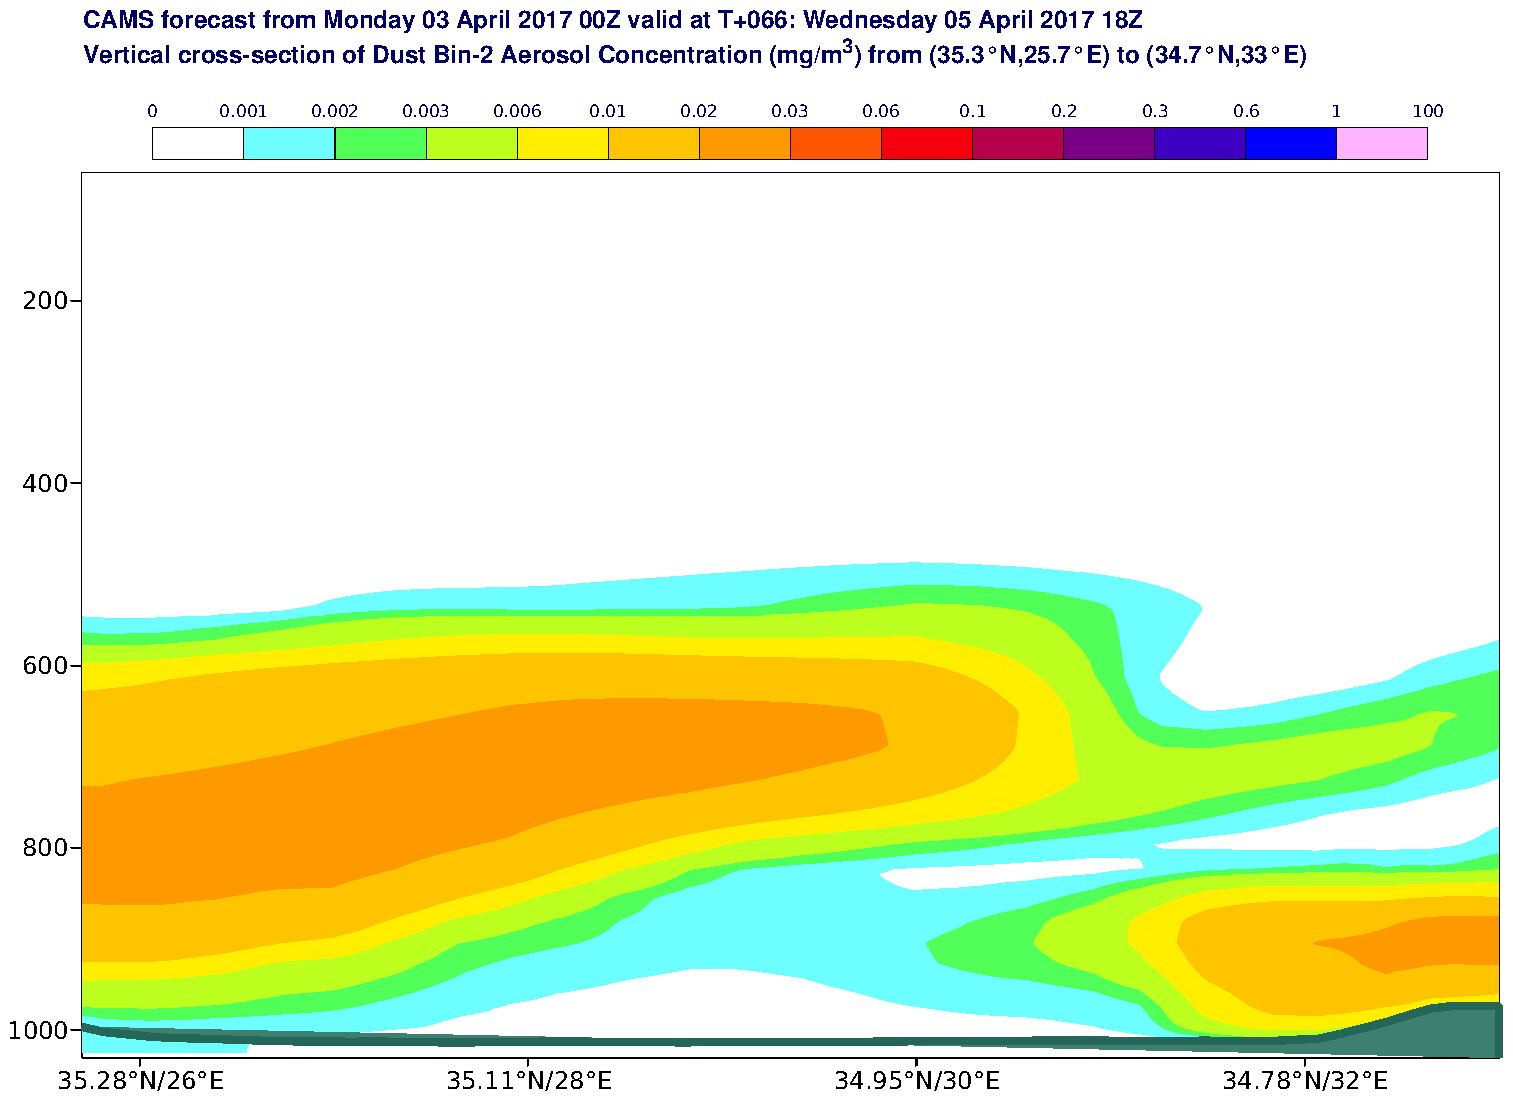 Vertical cross-section of Dust Bin-2 Aerosol Concentration (mg/m3) valid at T66 - 2017-04-05 18:00